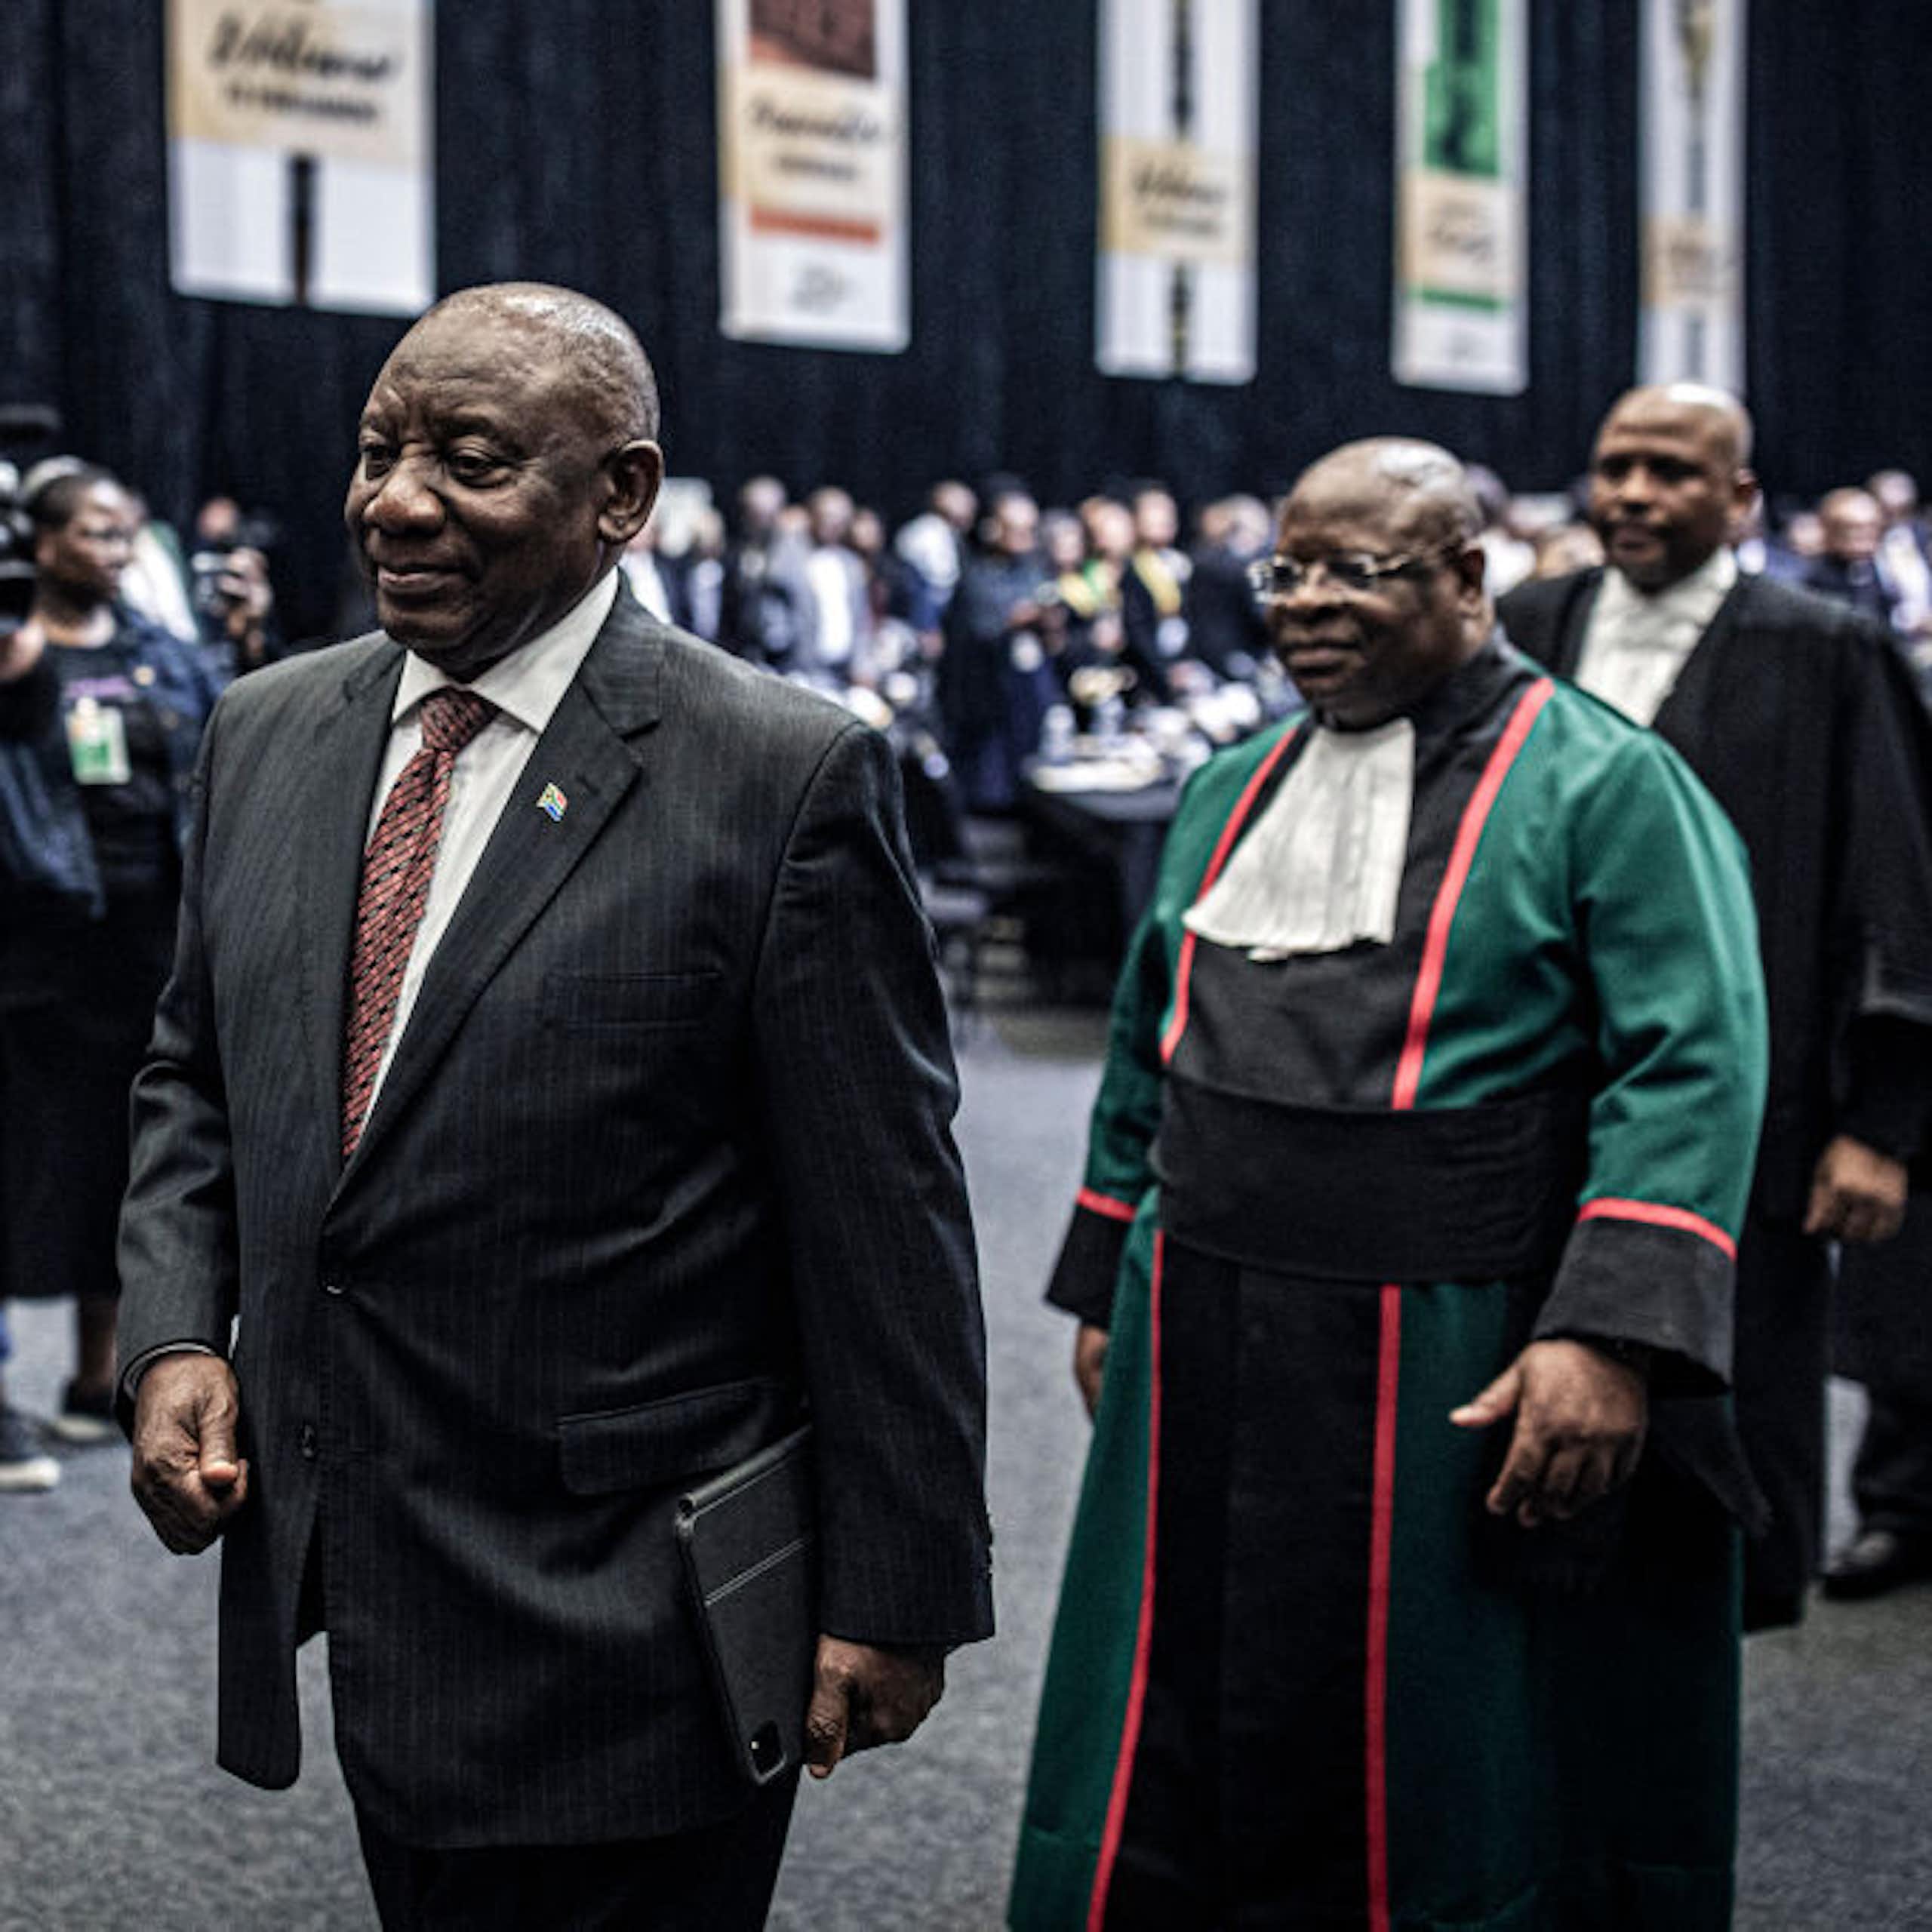 South Africa’s political monopoly has been broken: could it help the economy?